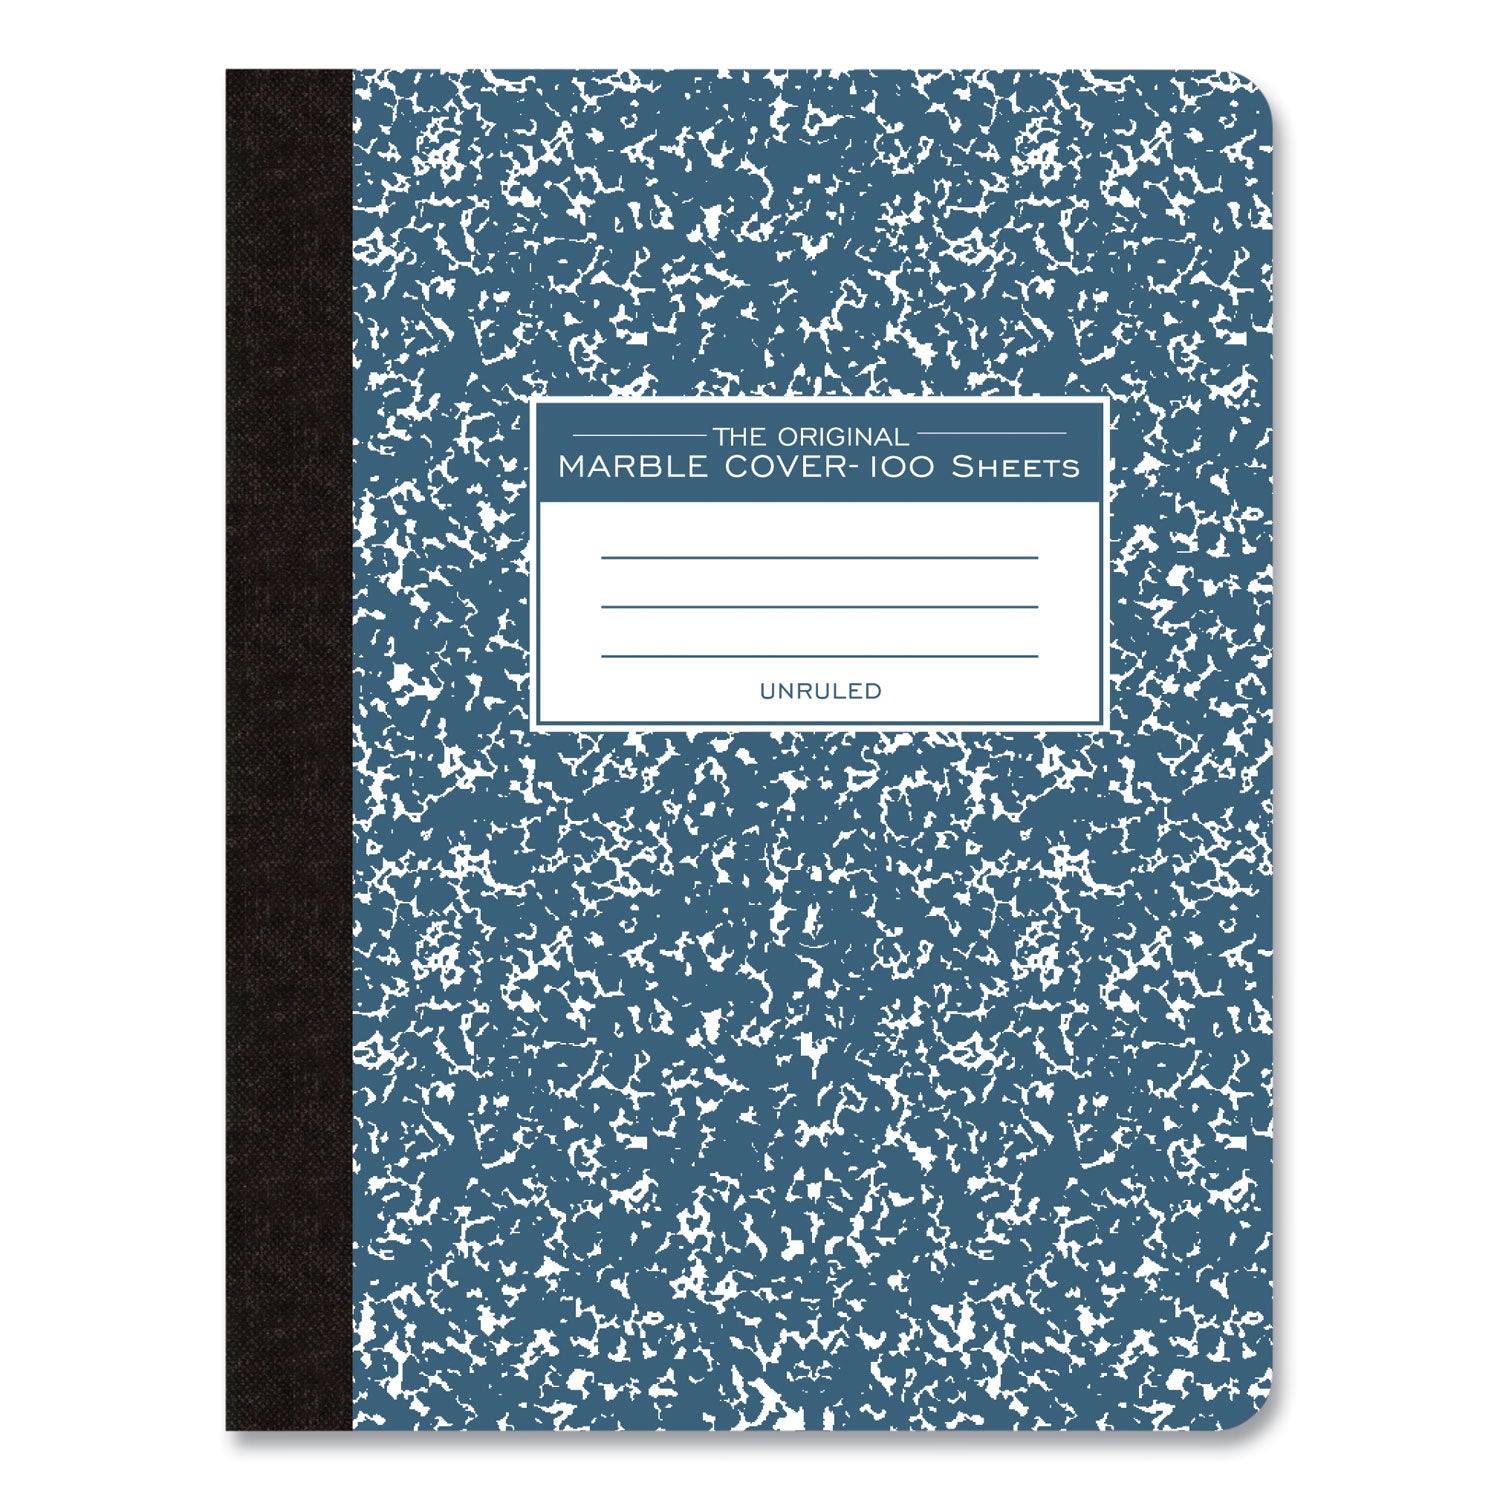 hardcover-marble-composition-book-unruled-blue-marble-cover-100-975-x-75-sheets-24-carton-ships-in-4-6-business-days_roa77261cs - 7